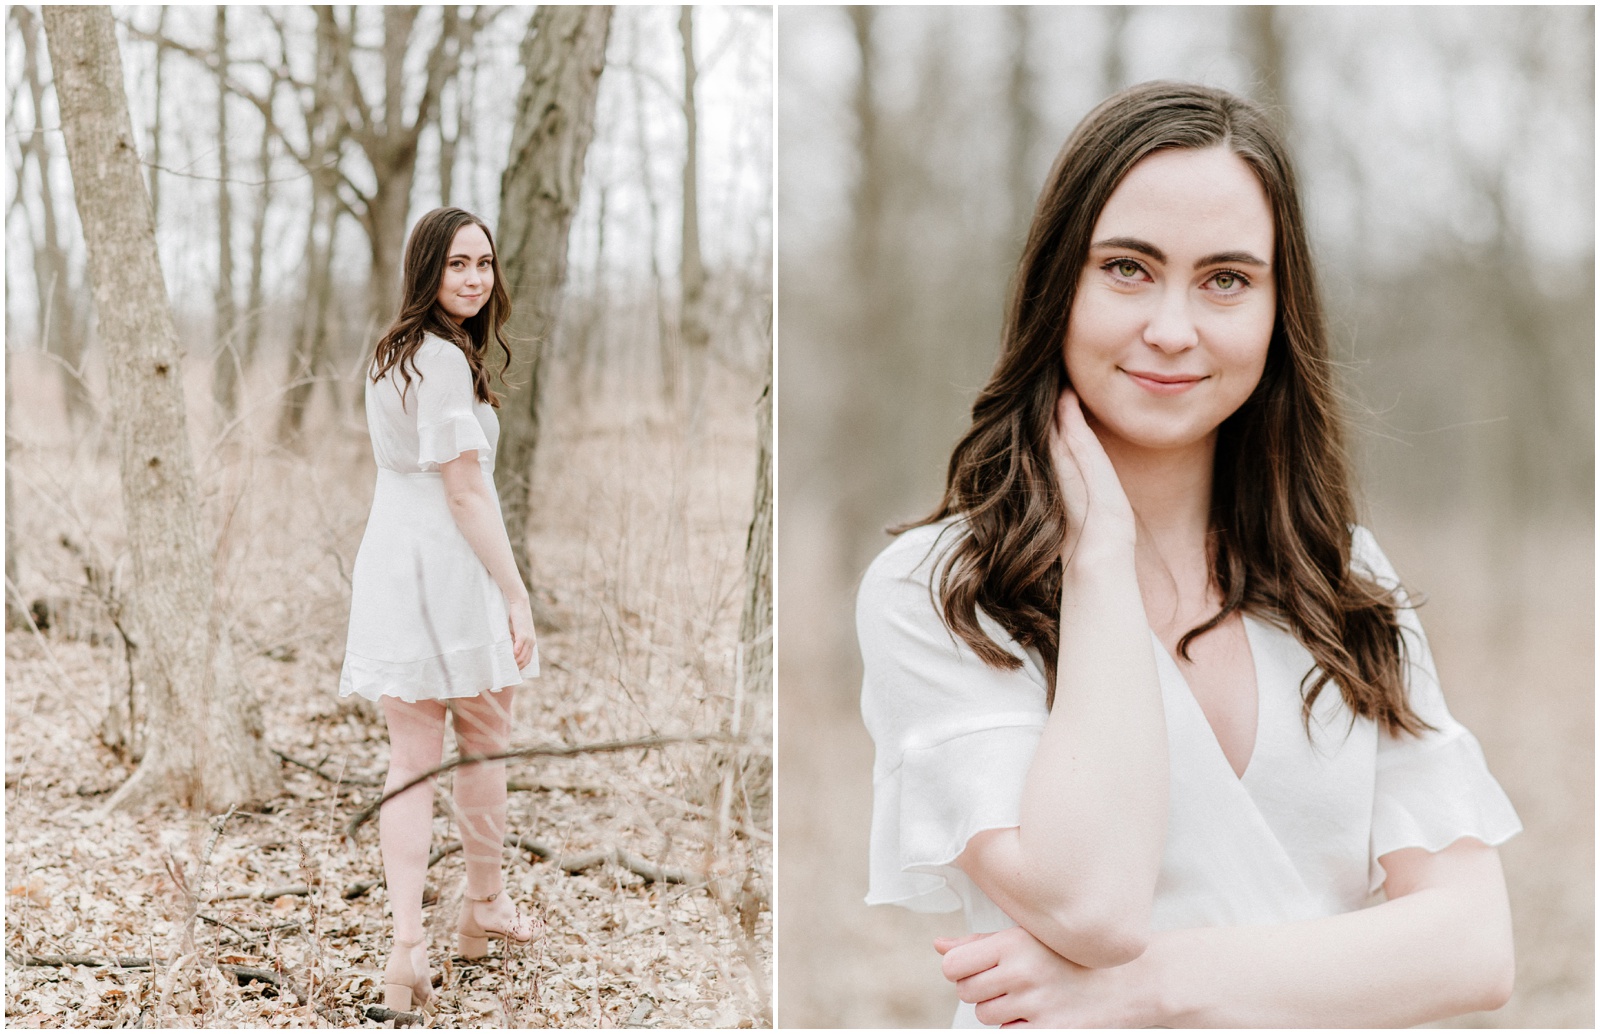 Senior photos with a white dress in a forest preserve